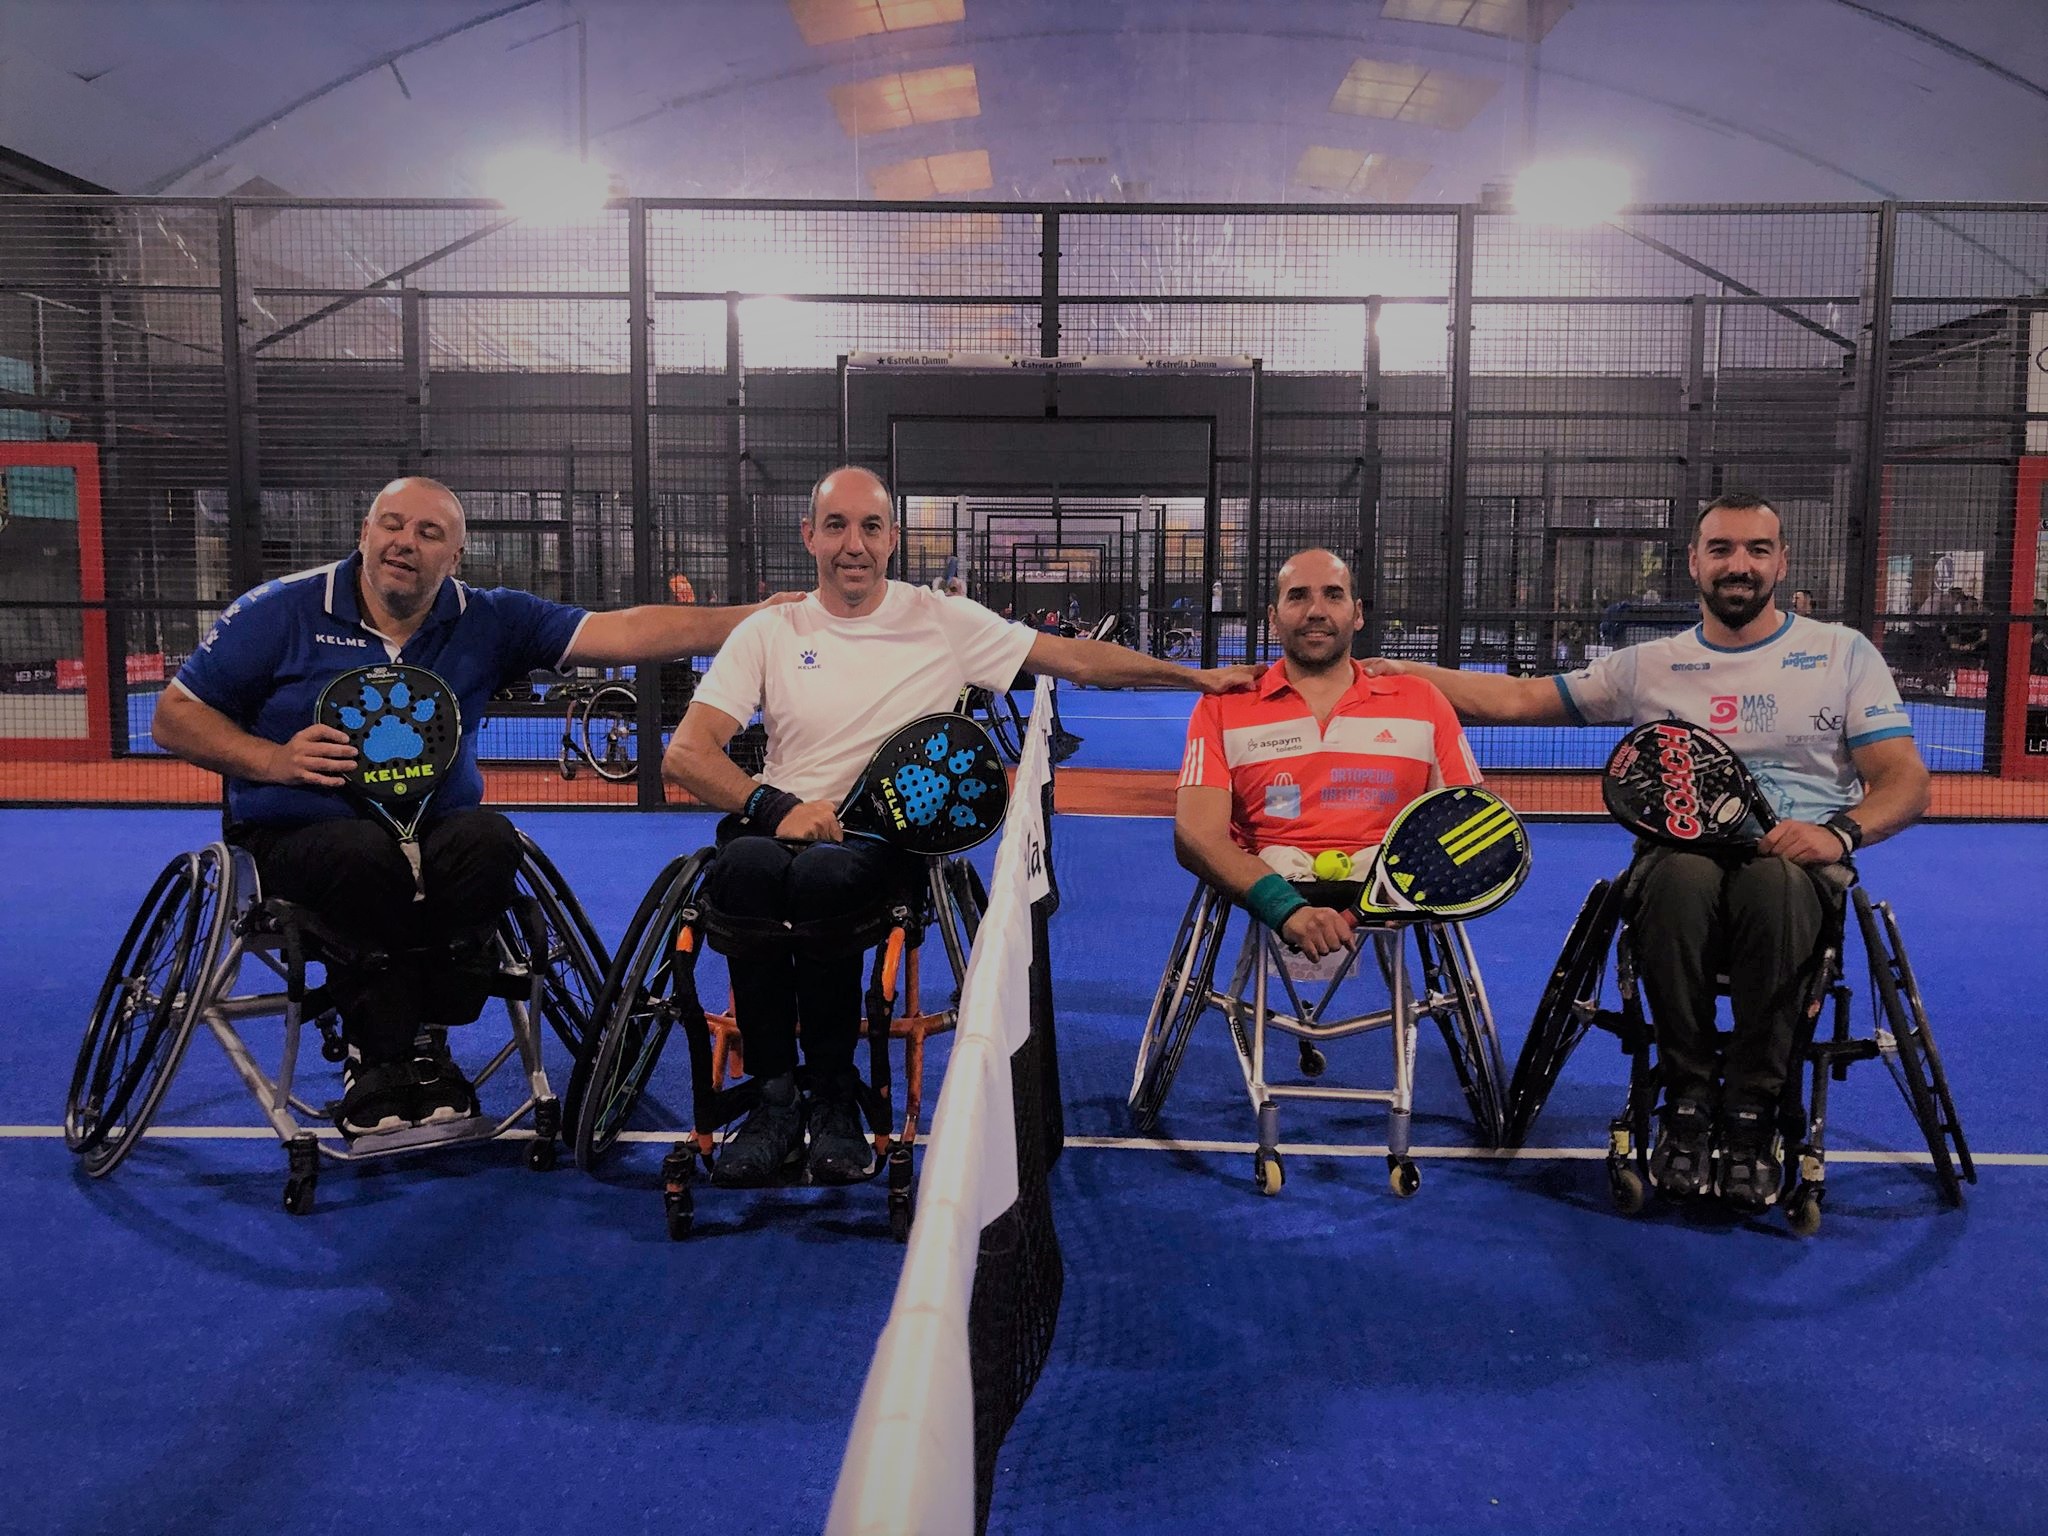 Le padel in wheelchairs - AWESOME